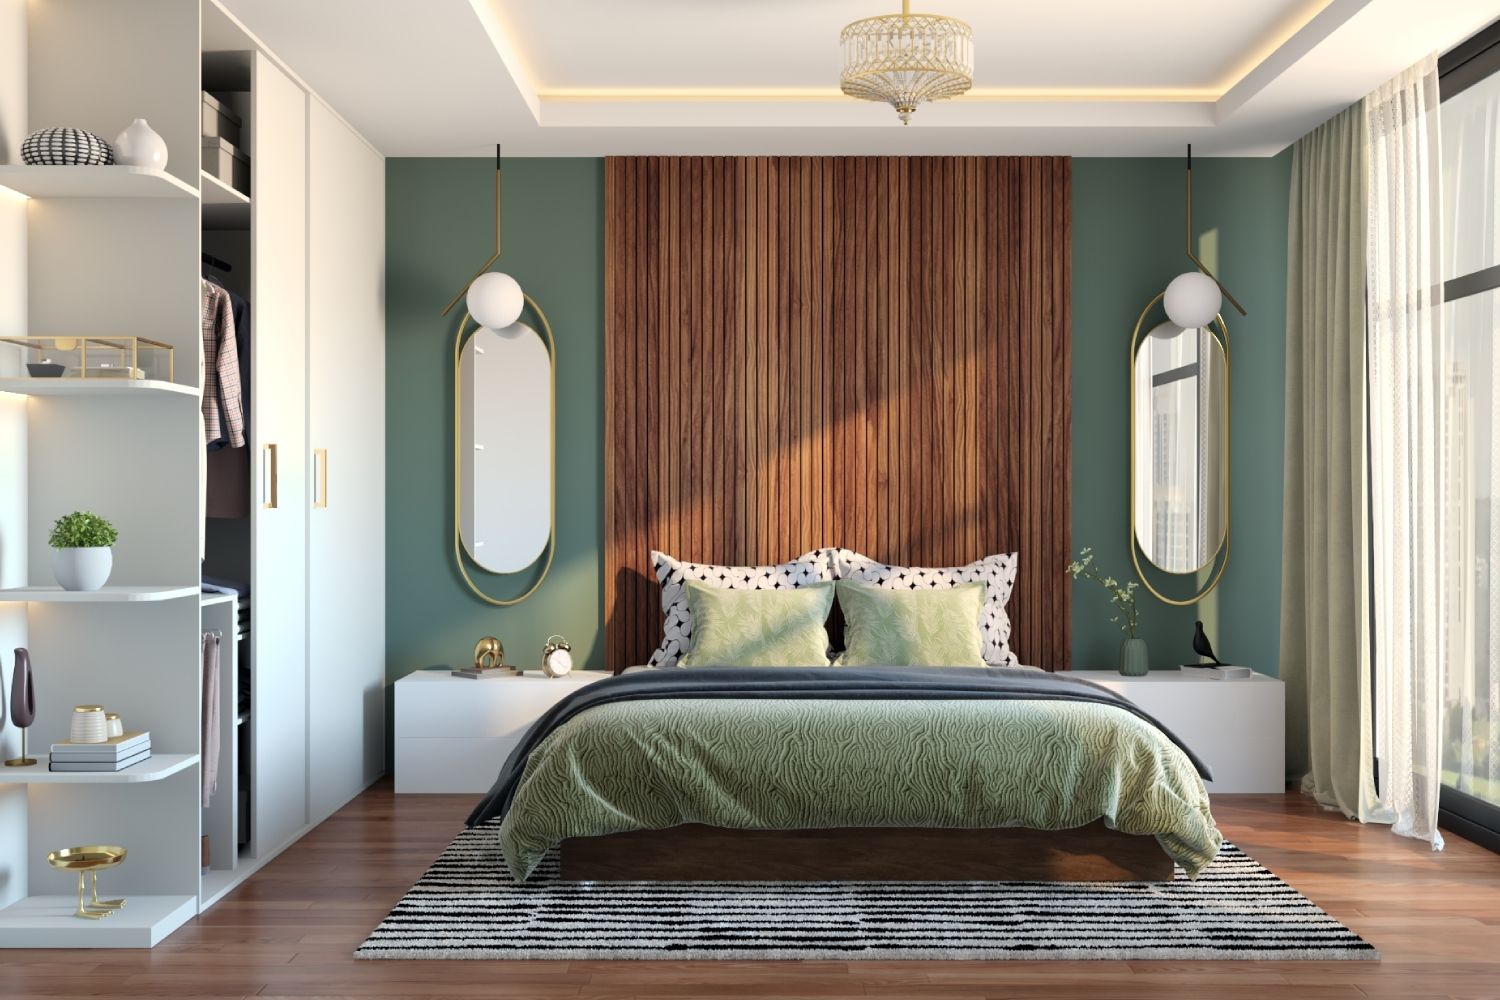 Contemporary Master Bedroom Design With Dark Green Accent Wall And Wooden Fluted Panels